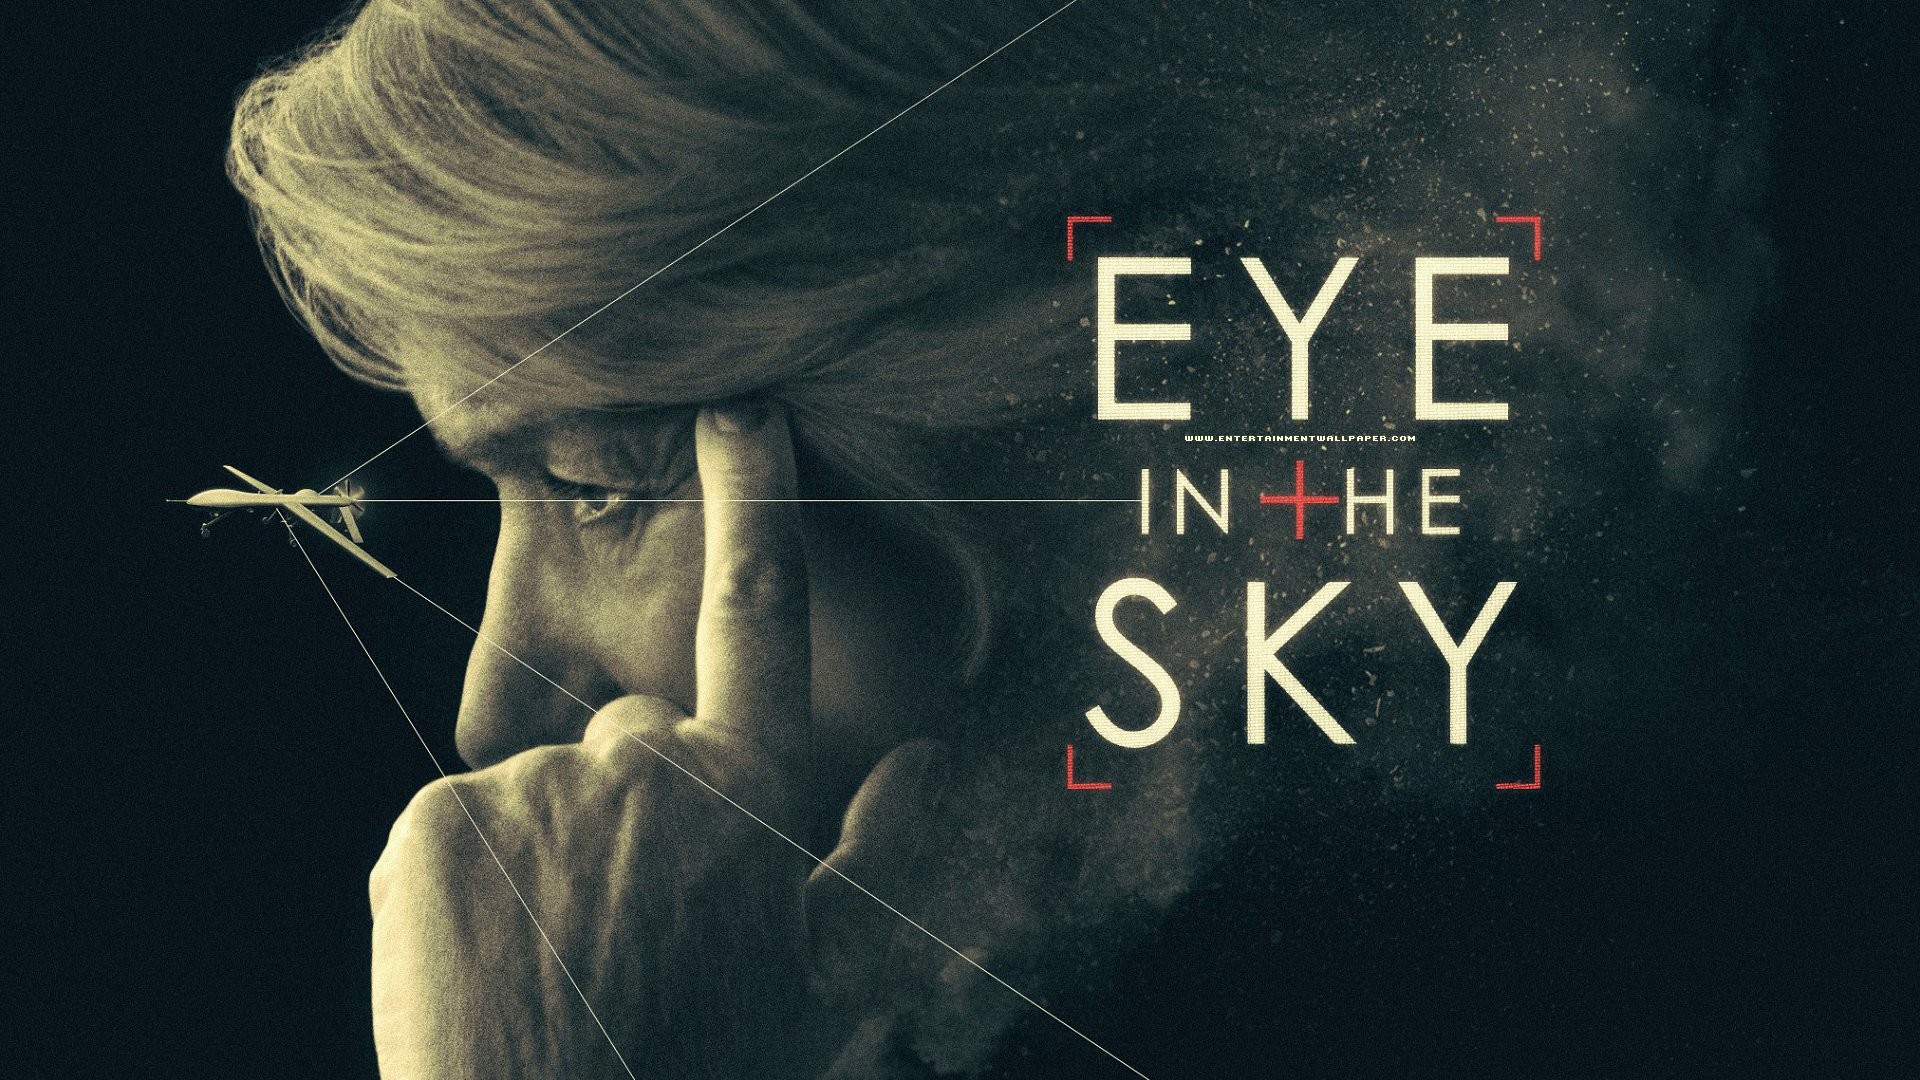 1920x1080 Eye in the Sky Wallpaper - Original size, download now.